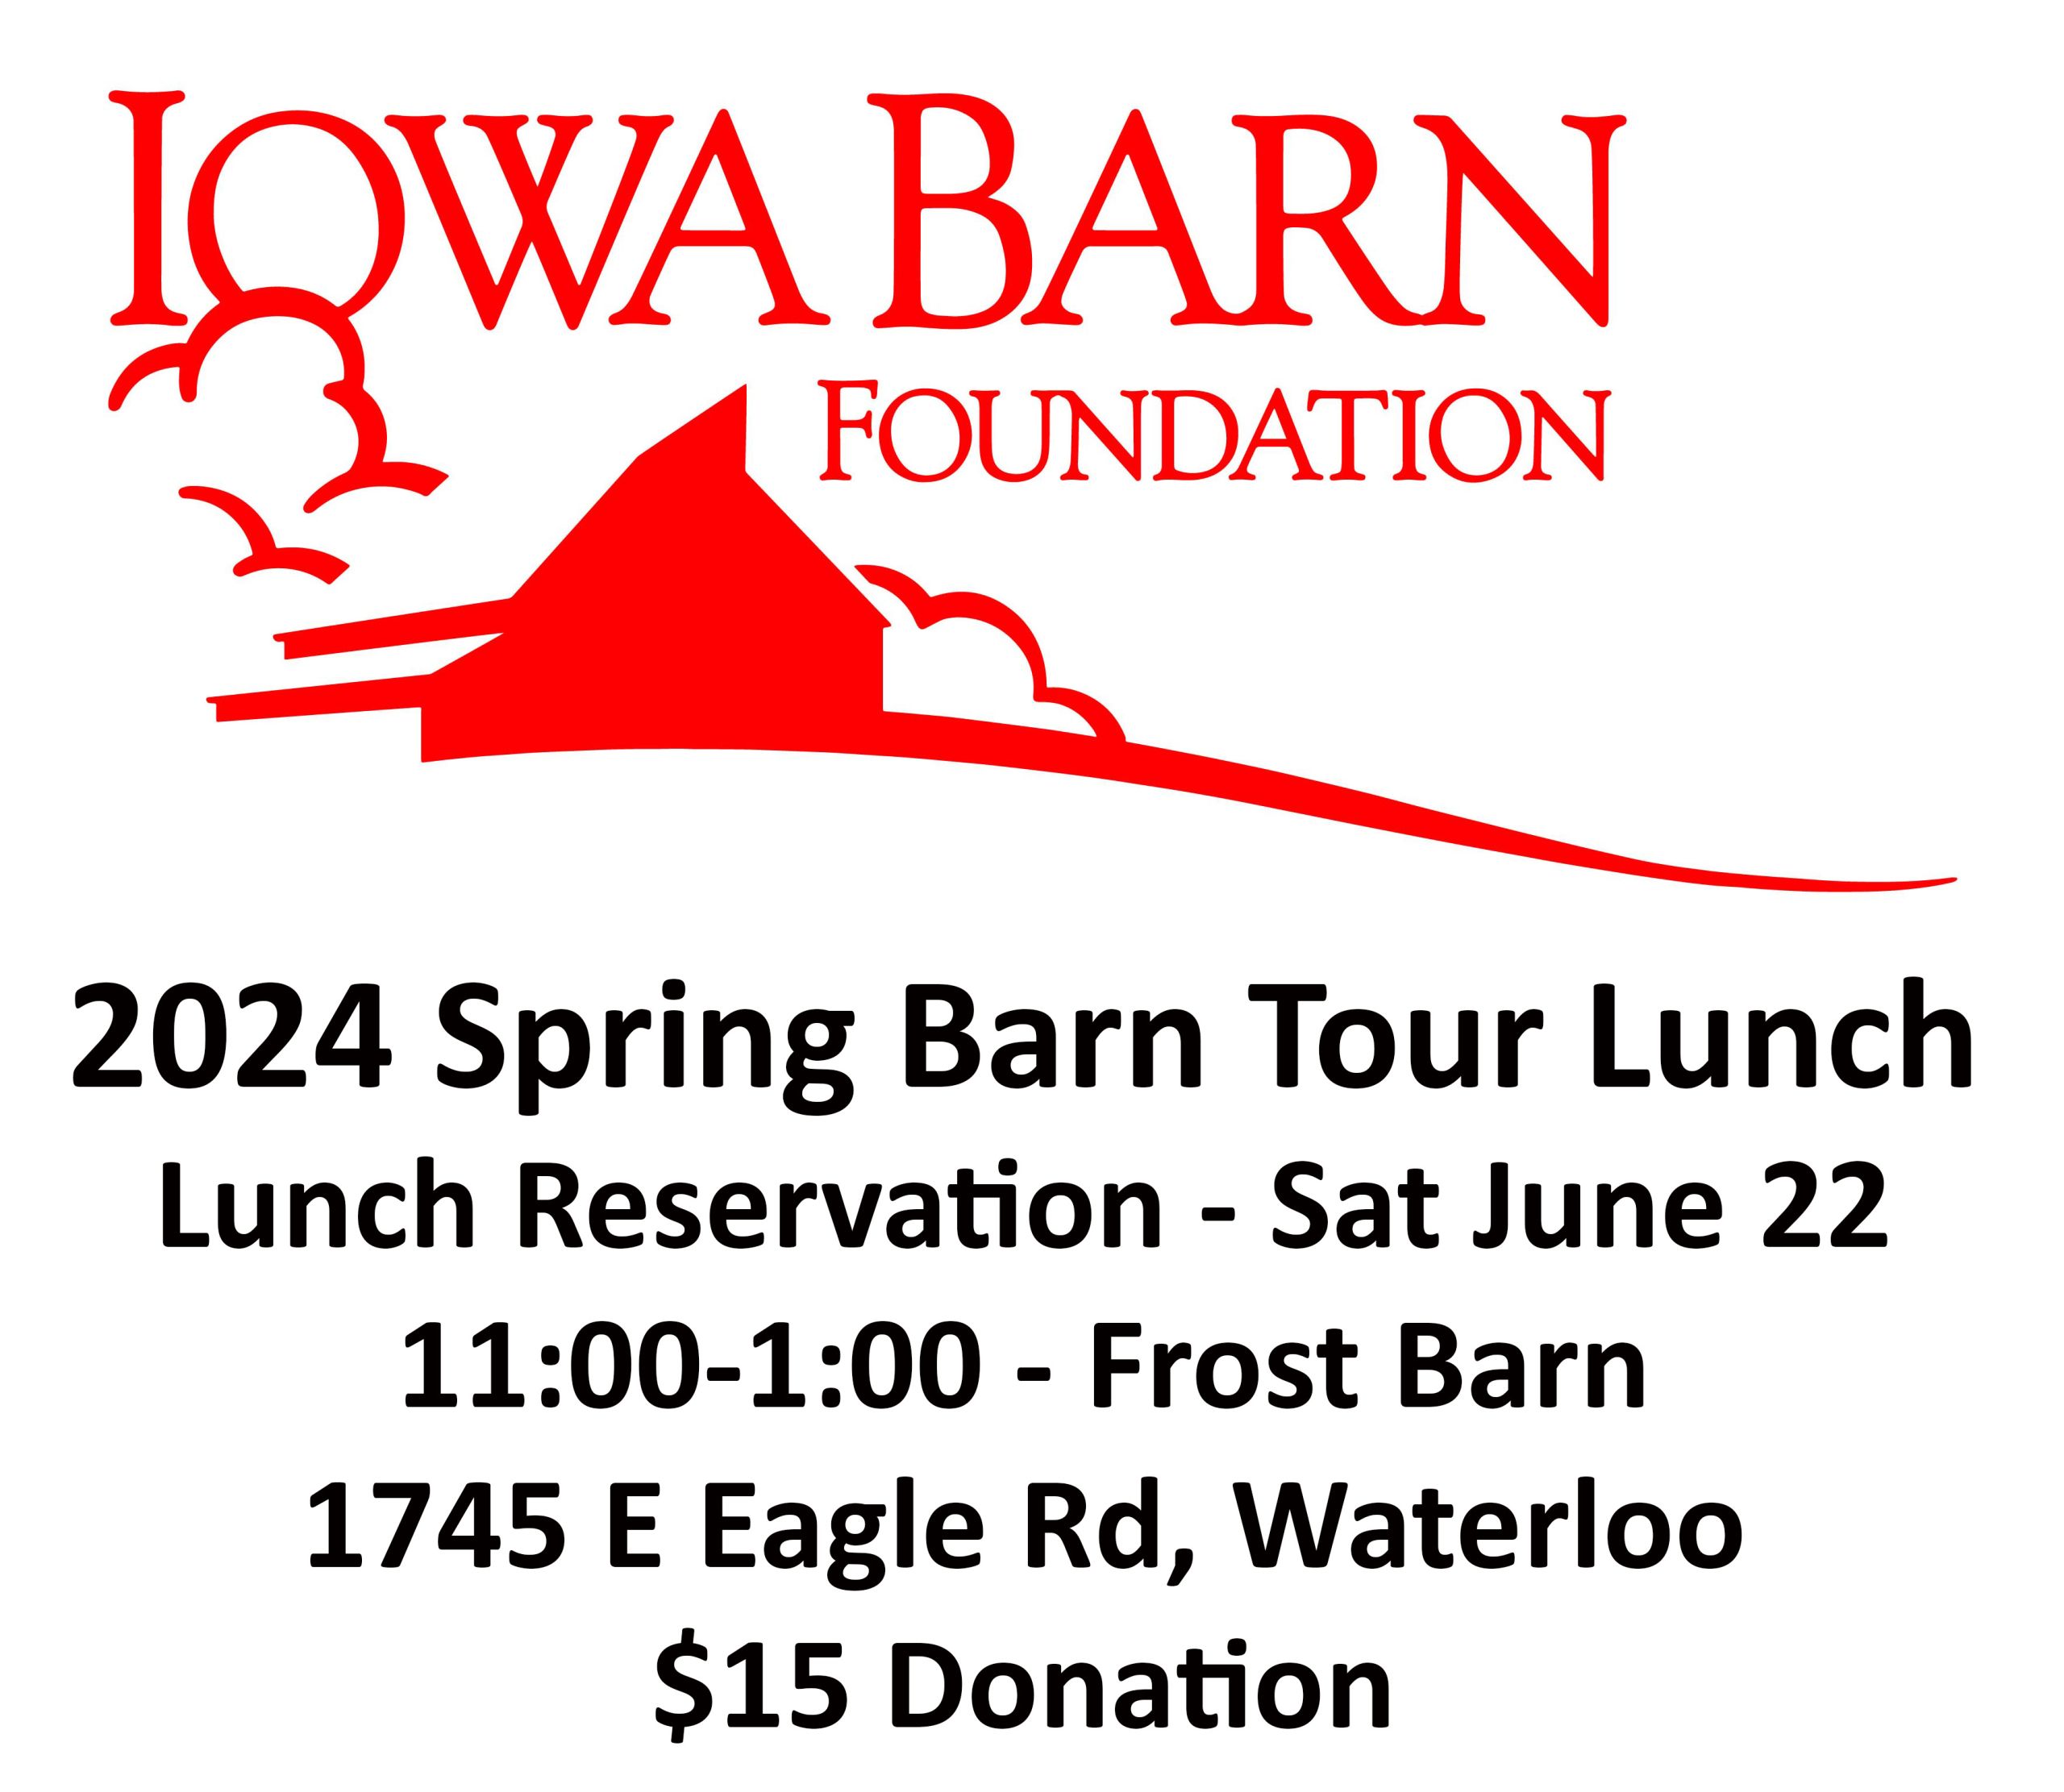 2024 Spring Barn Tour Lunch Reservation – Sat, Jun 22 at the Frost Barn